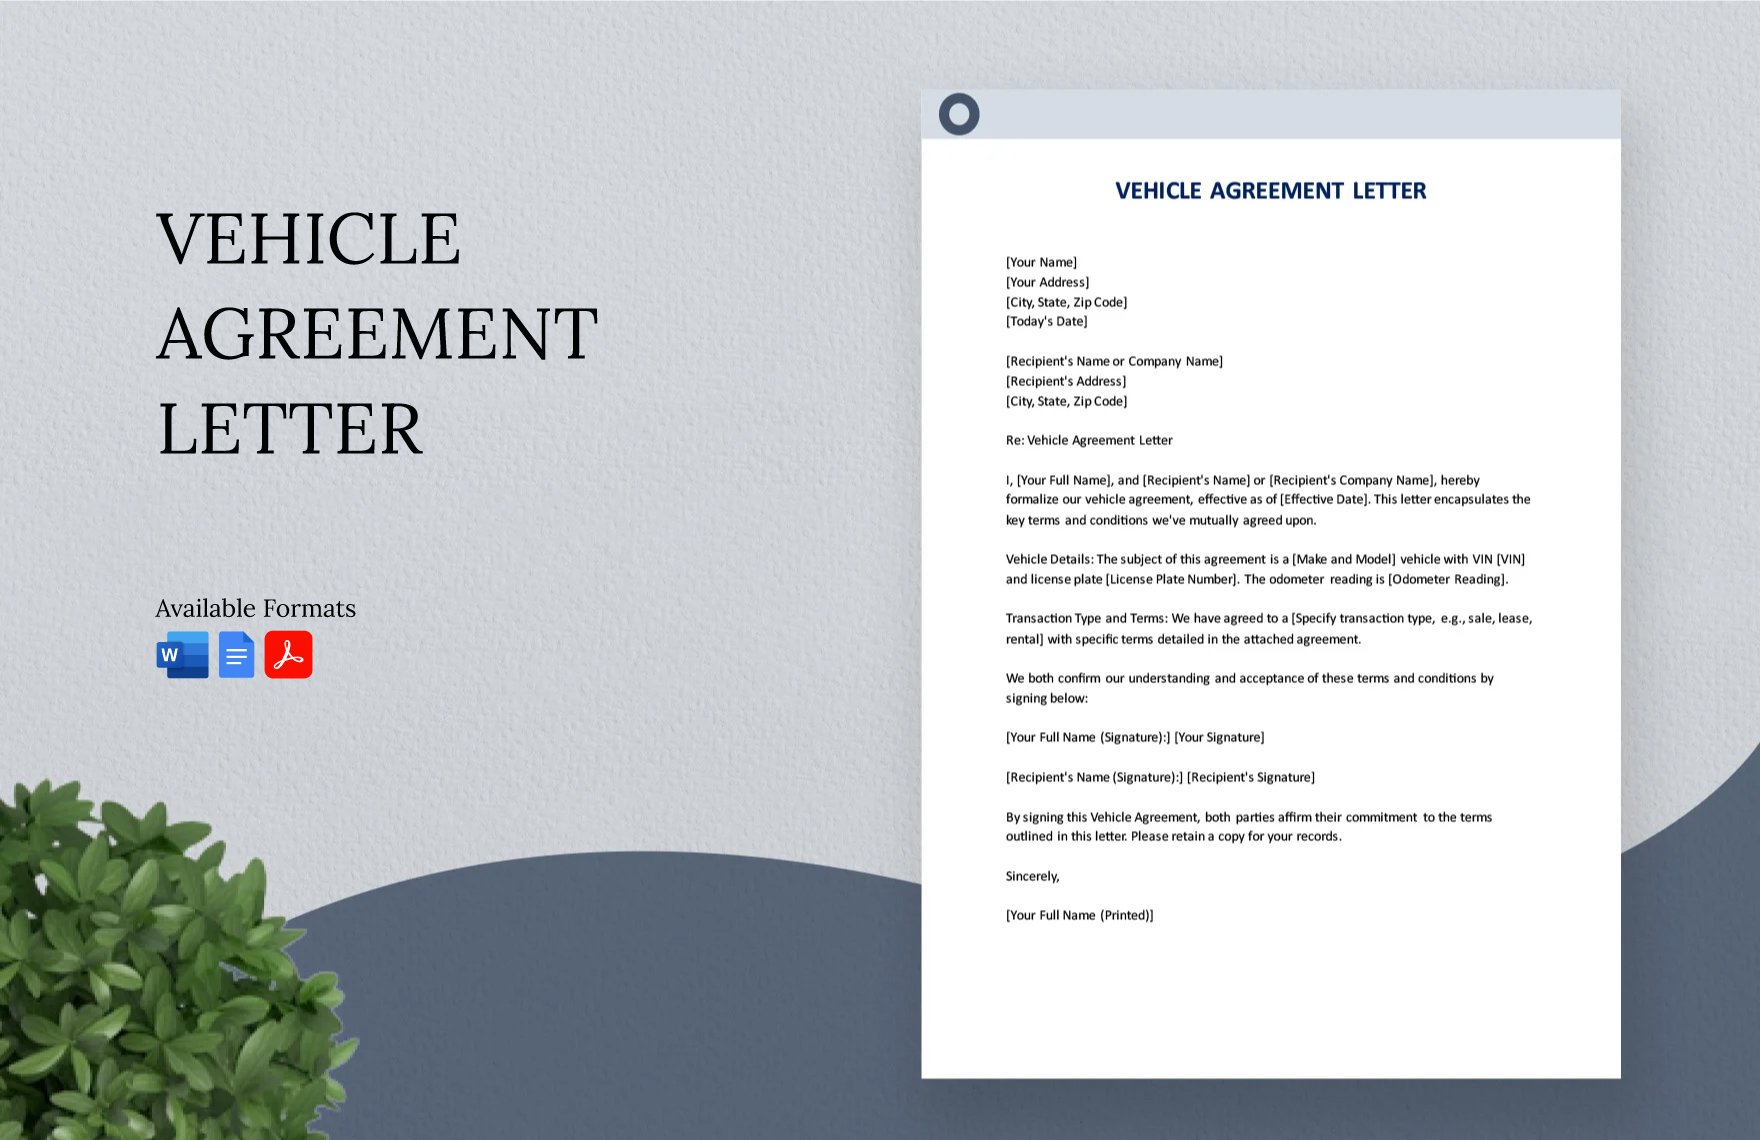 Vehicle Agreement Letter in Word, Google Docs, PDF